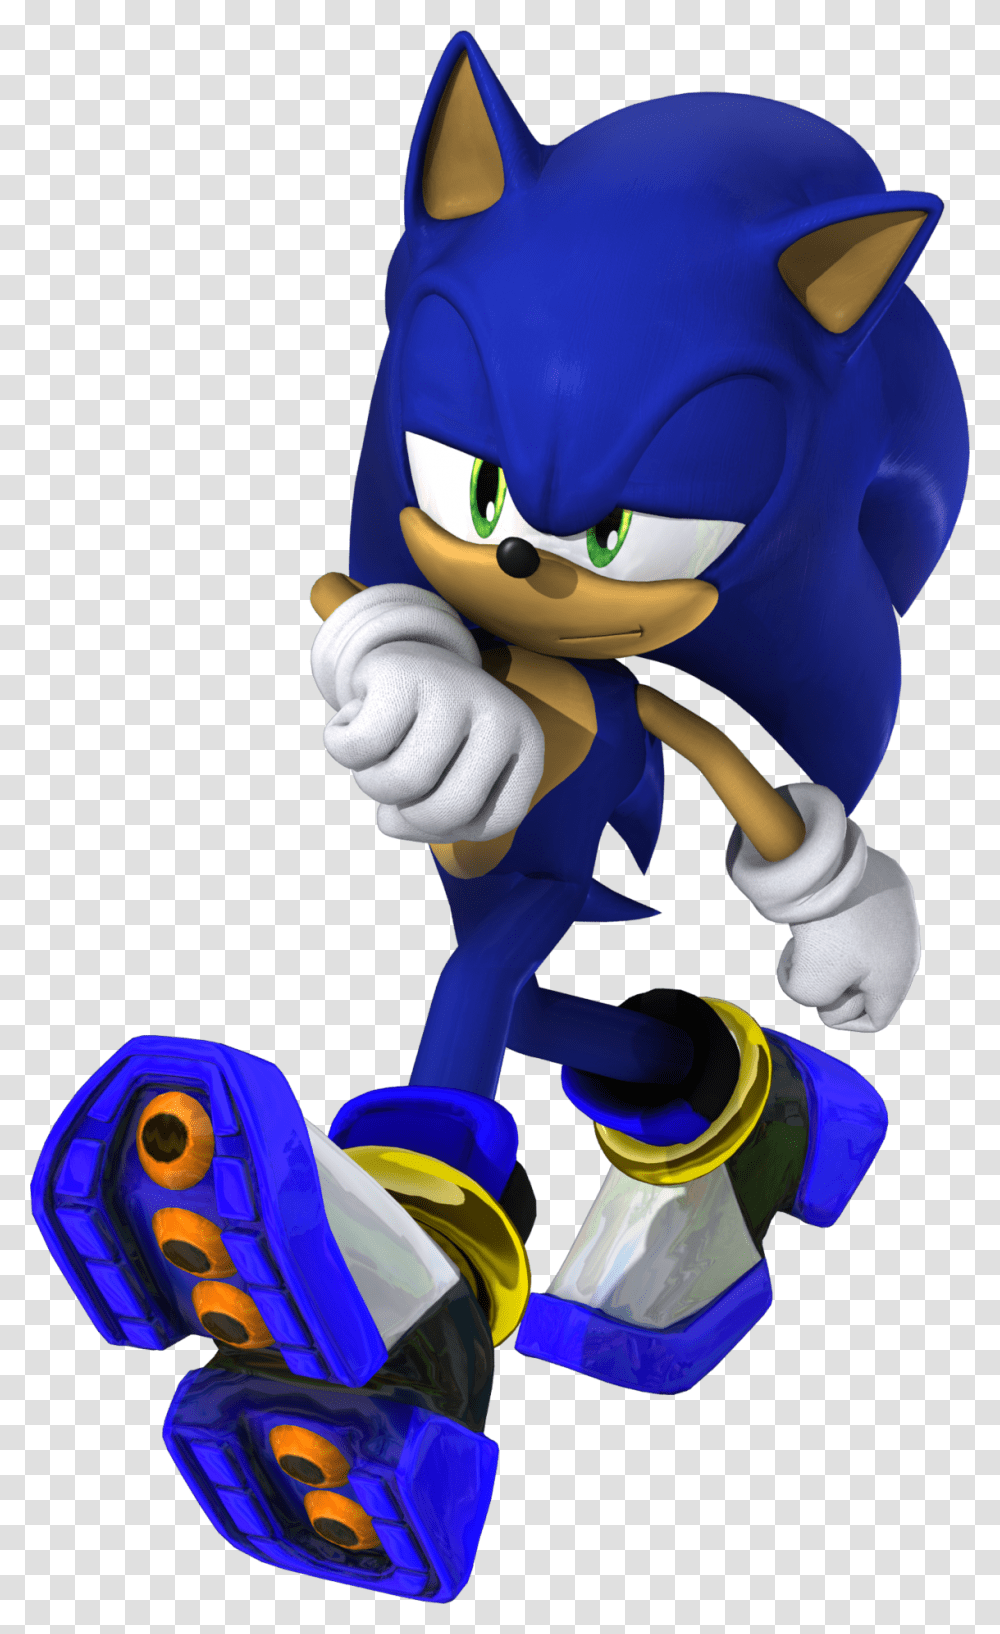 Shadow The Hedgehog Sonic The Hedgehog With Shadow Shoes, Toy, Apparel, Sweets Transparent Png